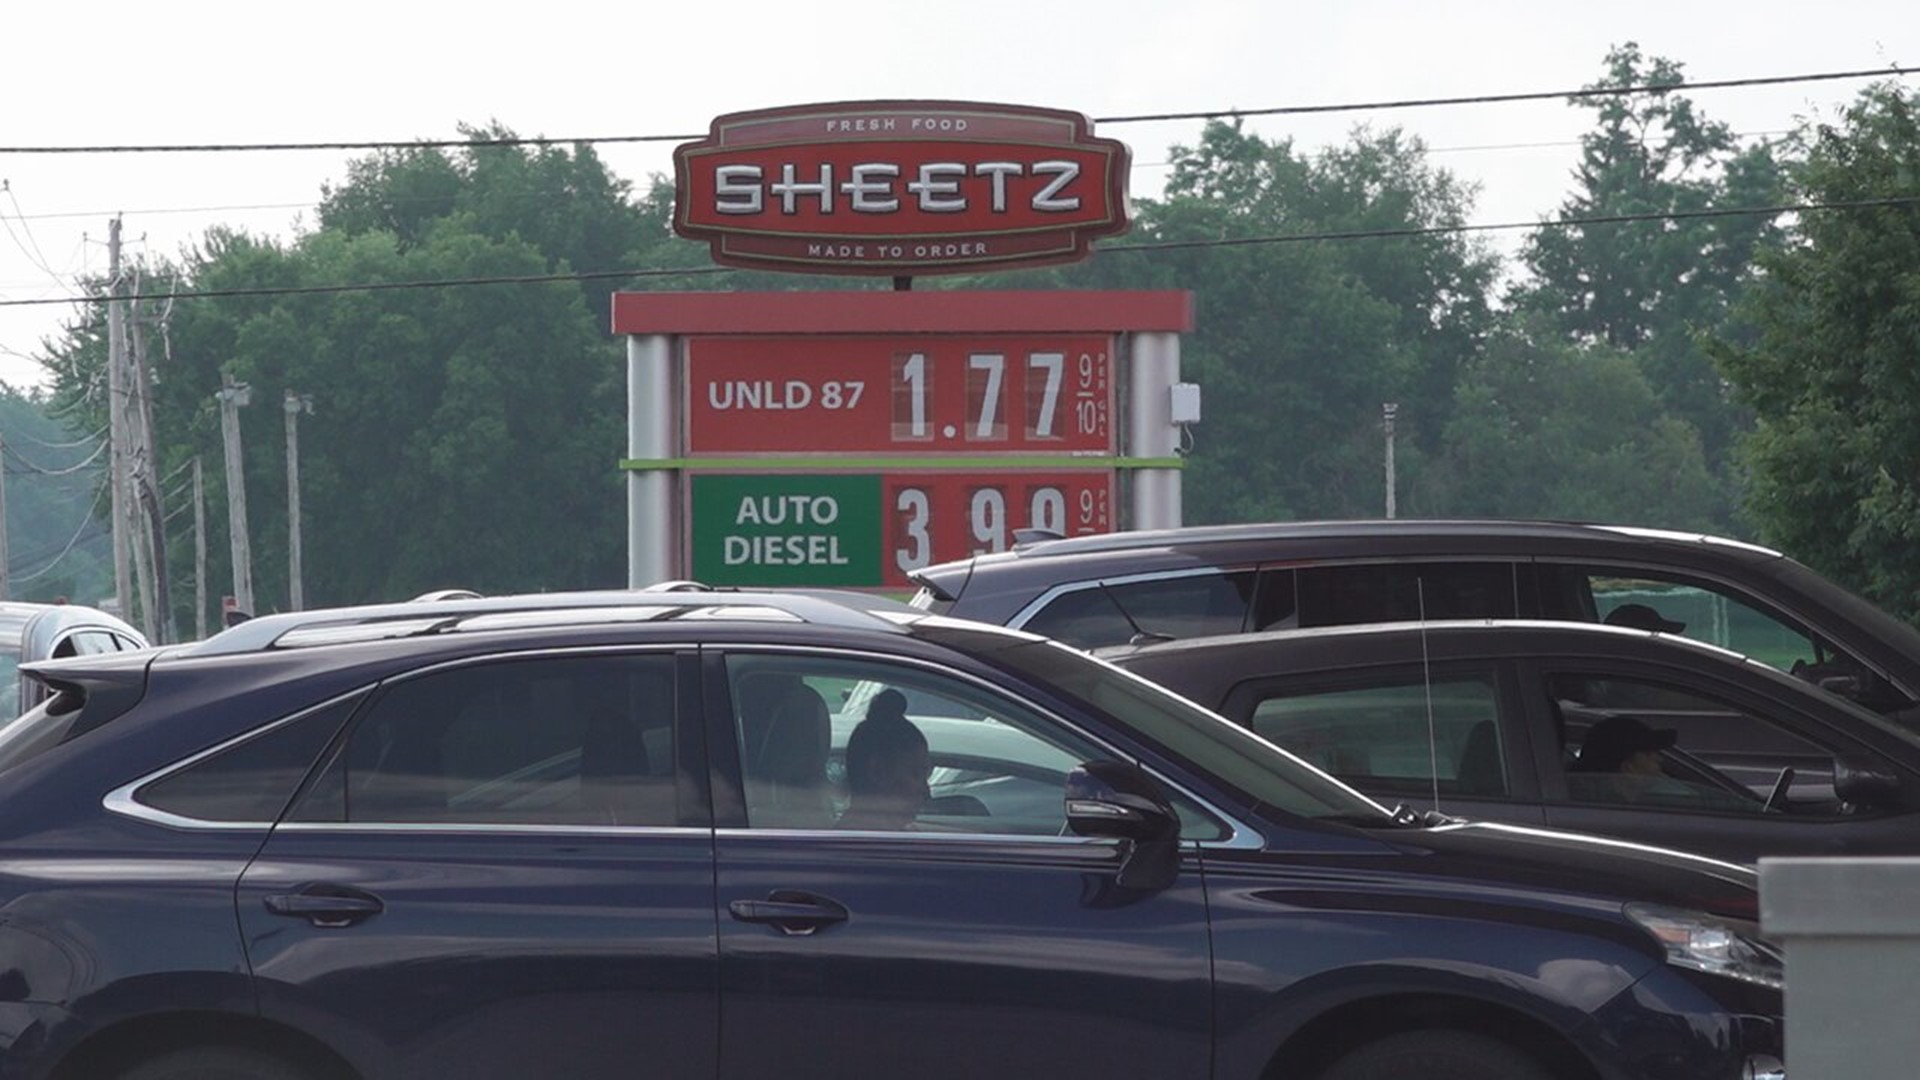 Plenty of drivers are taking advantage of discounted gas prices after Sheetz announced it was reducing its prices to $1.776 per gallon for July 4.